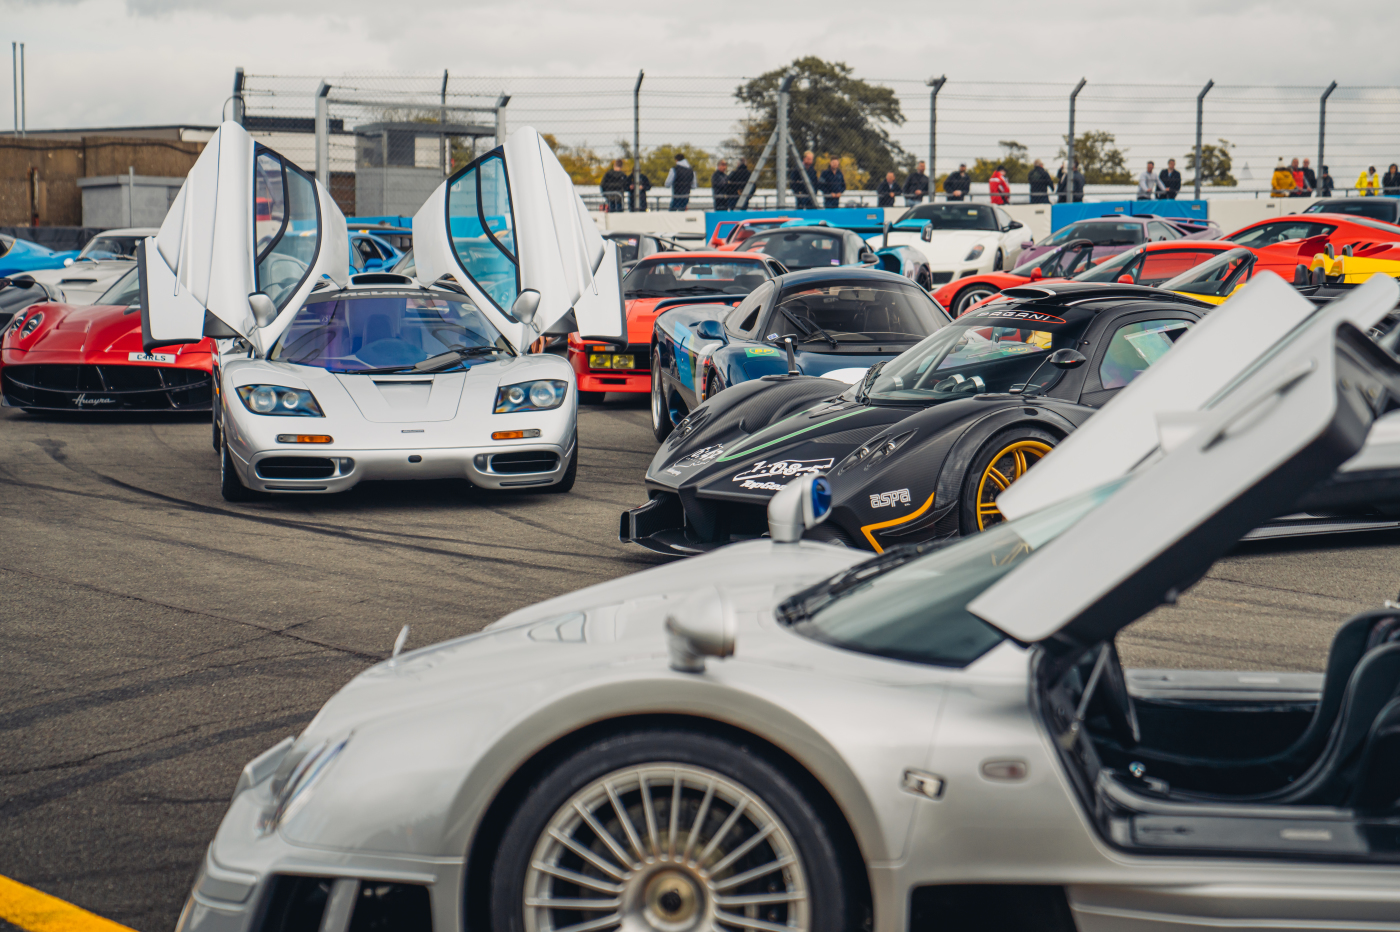 UK's Greatest Car Collection